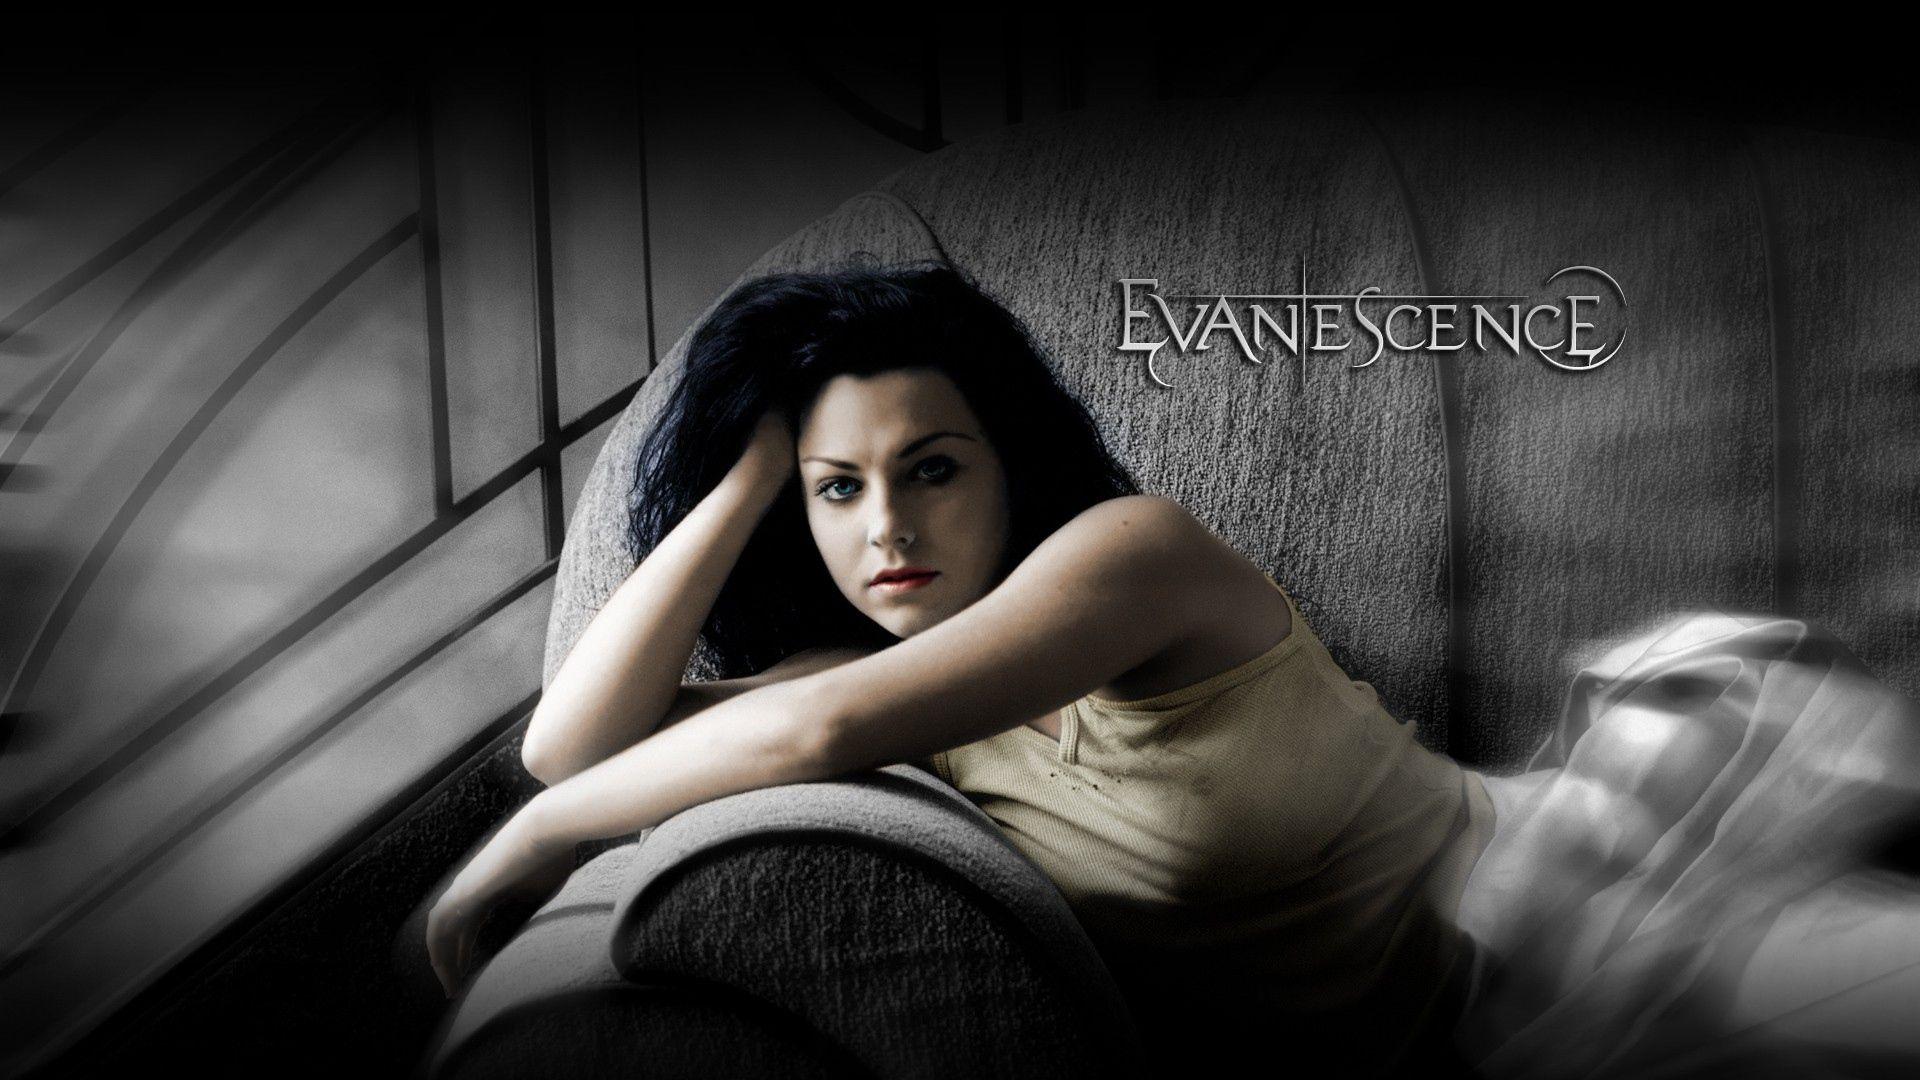 Evanescence Background Free Download